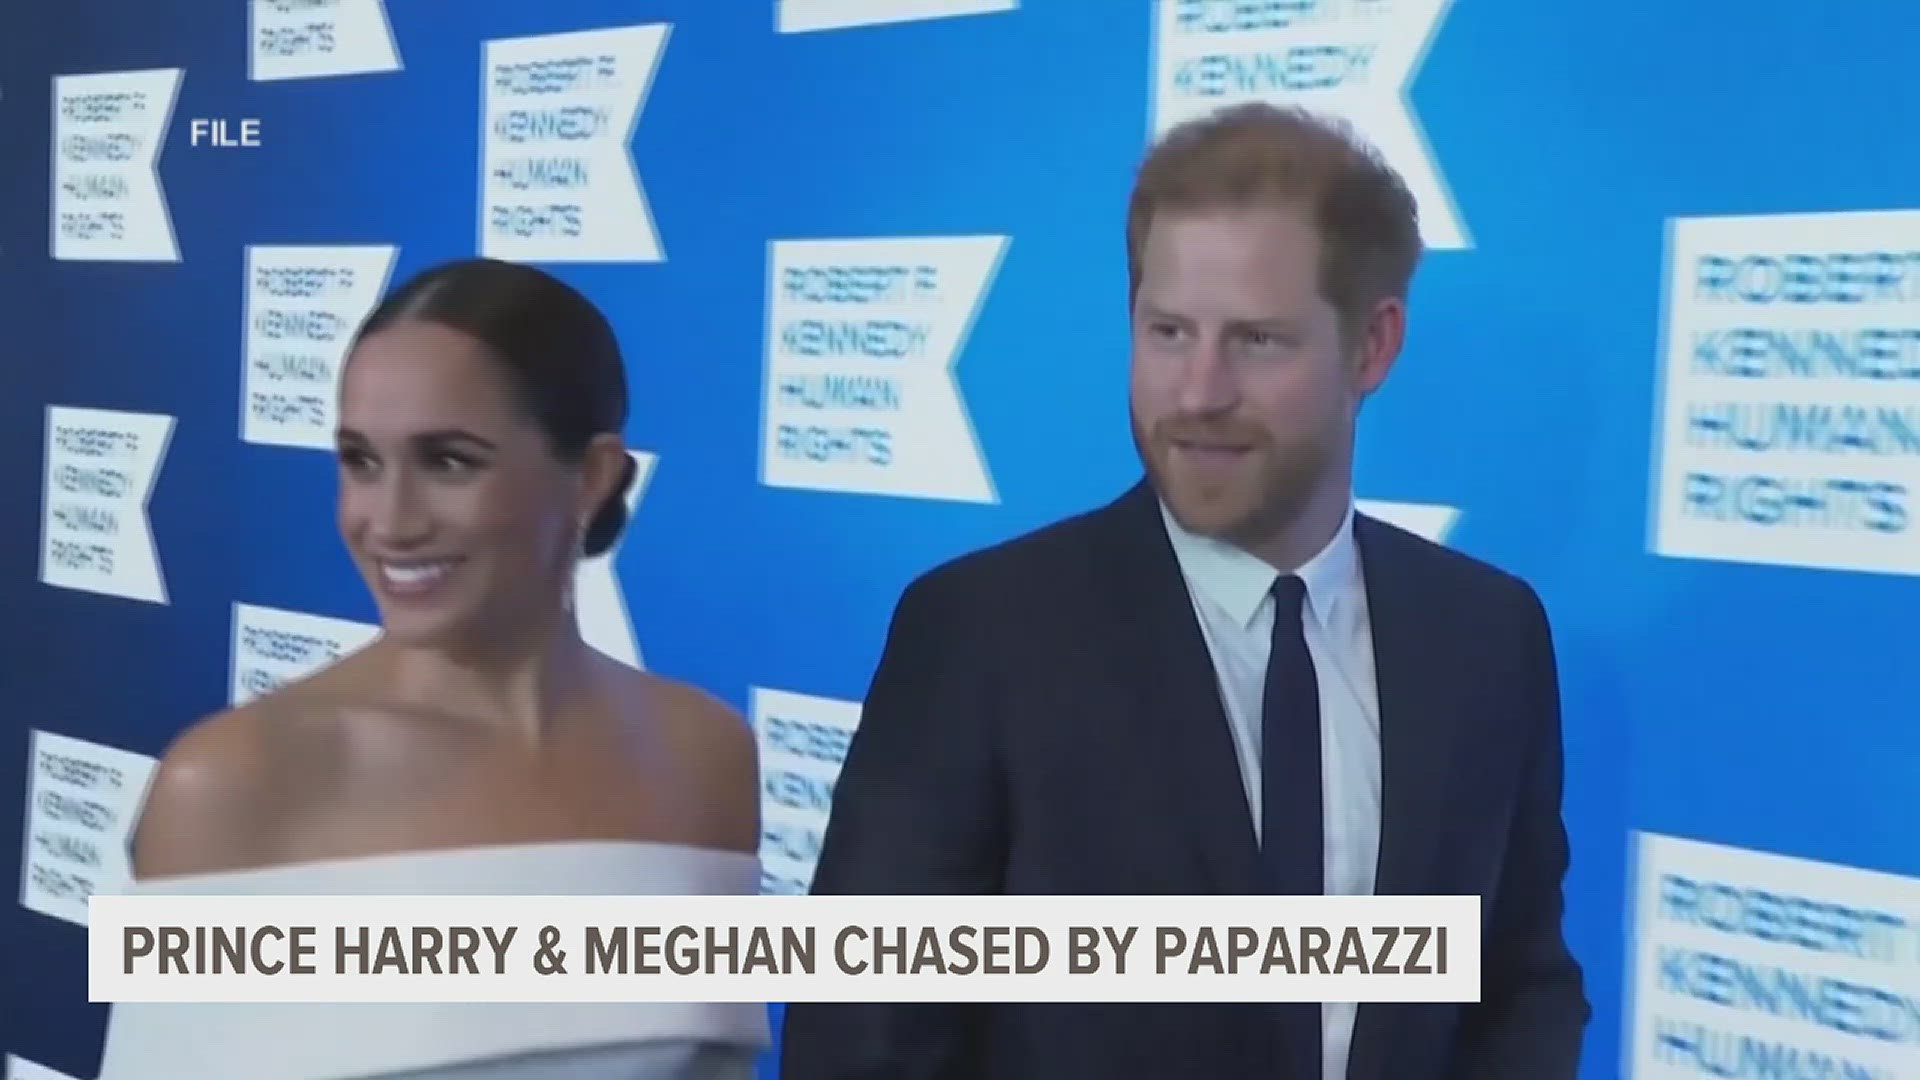 The couple and Meghan's mother were followed for more than 2 hours by half a dozen vehicles after a charity event.